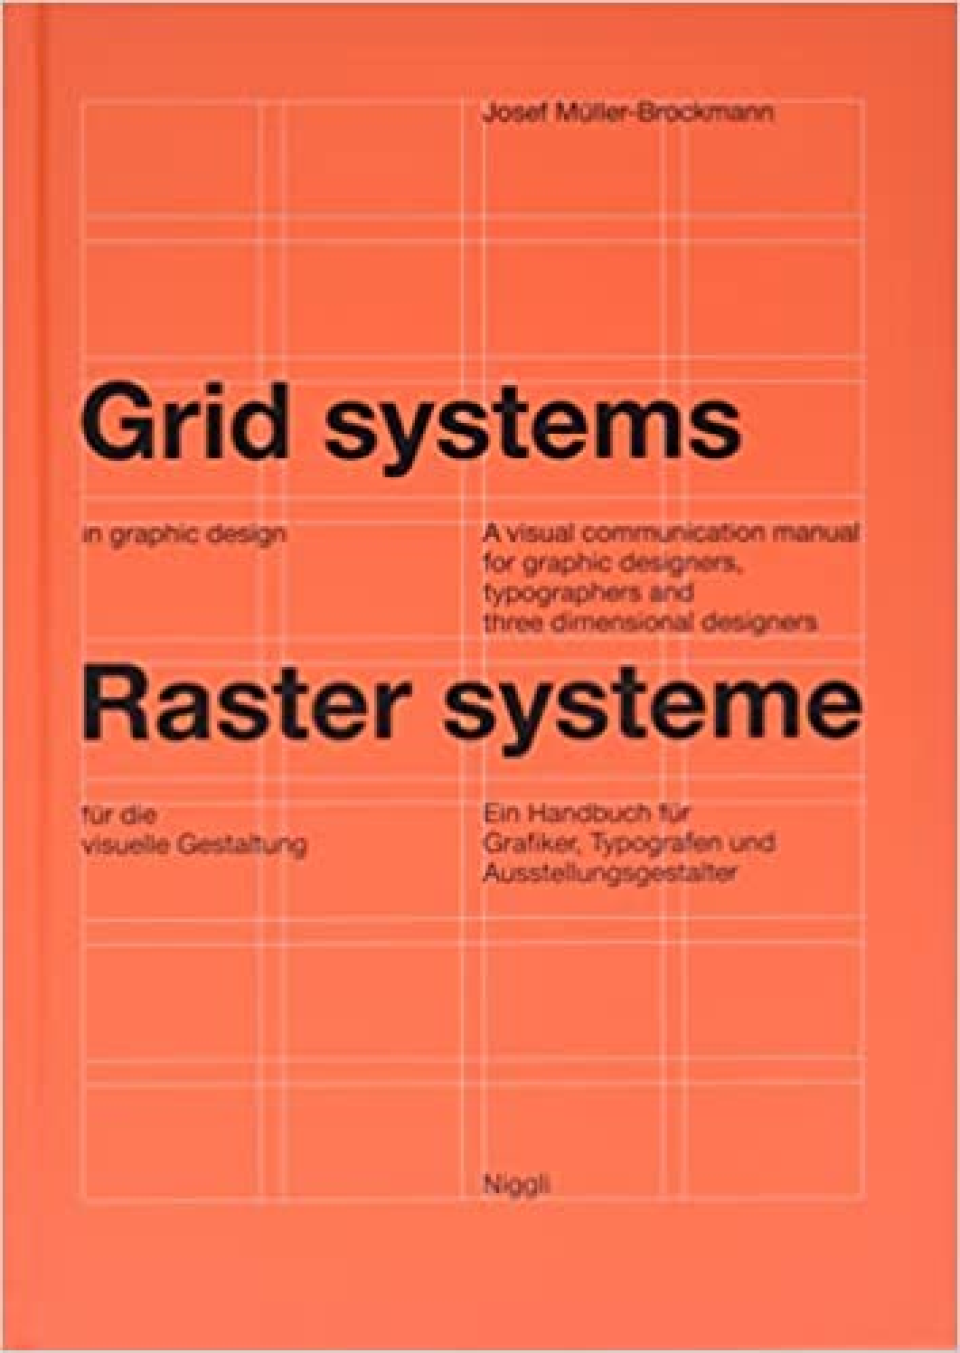 Grid Systems in Graphic Design: A Visual Communication Manual for Graphic Designers, Typographers, and Three Dimensional Designers